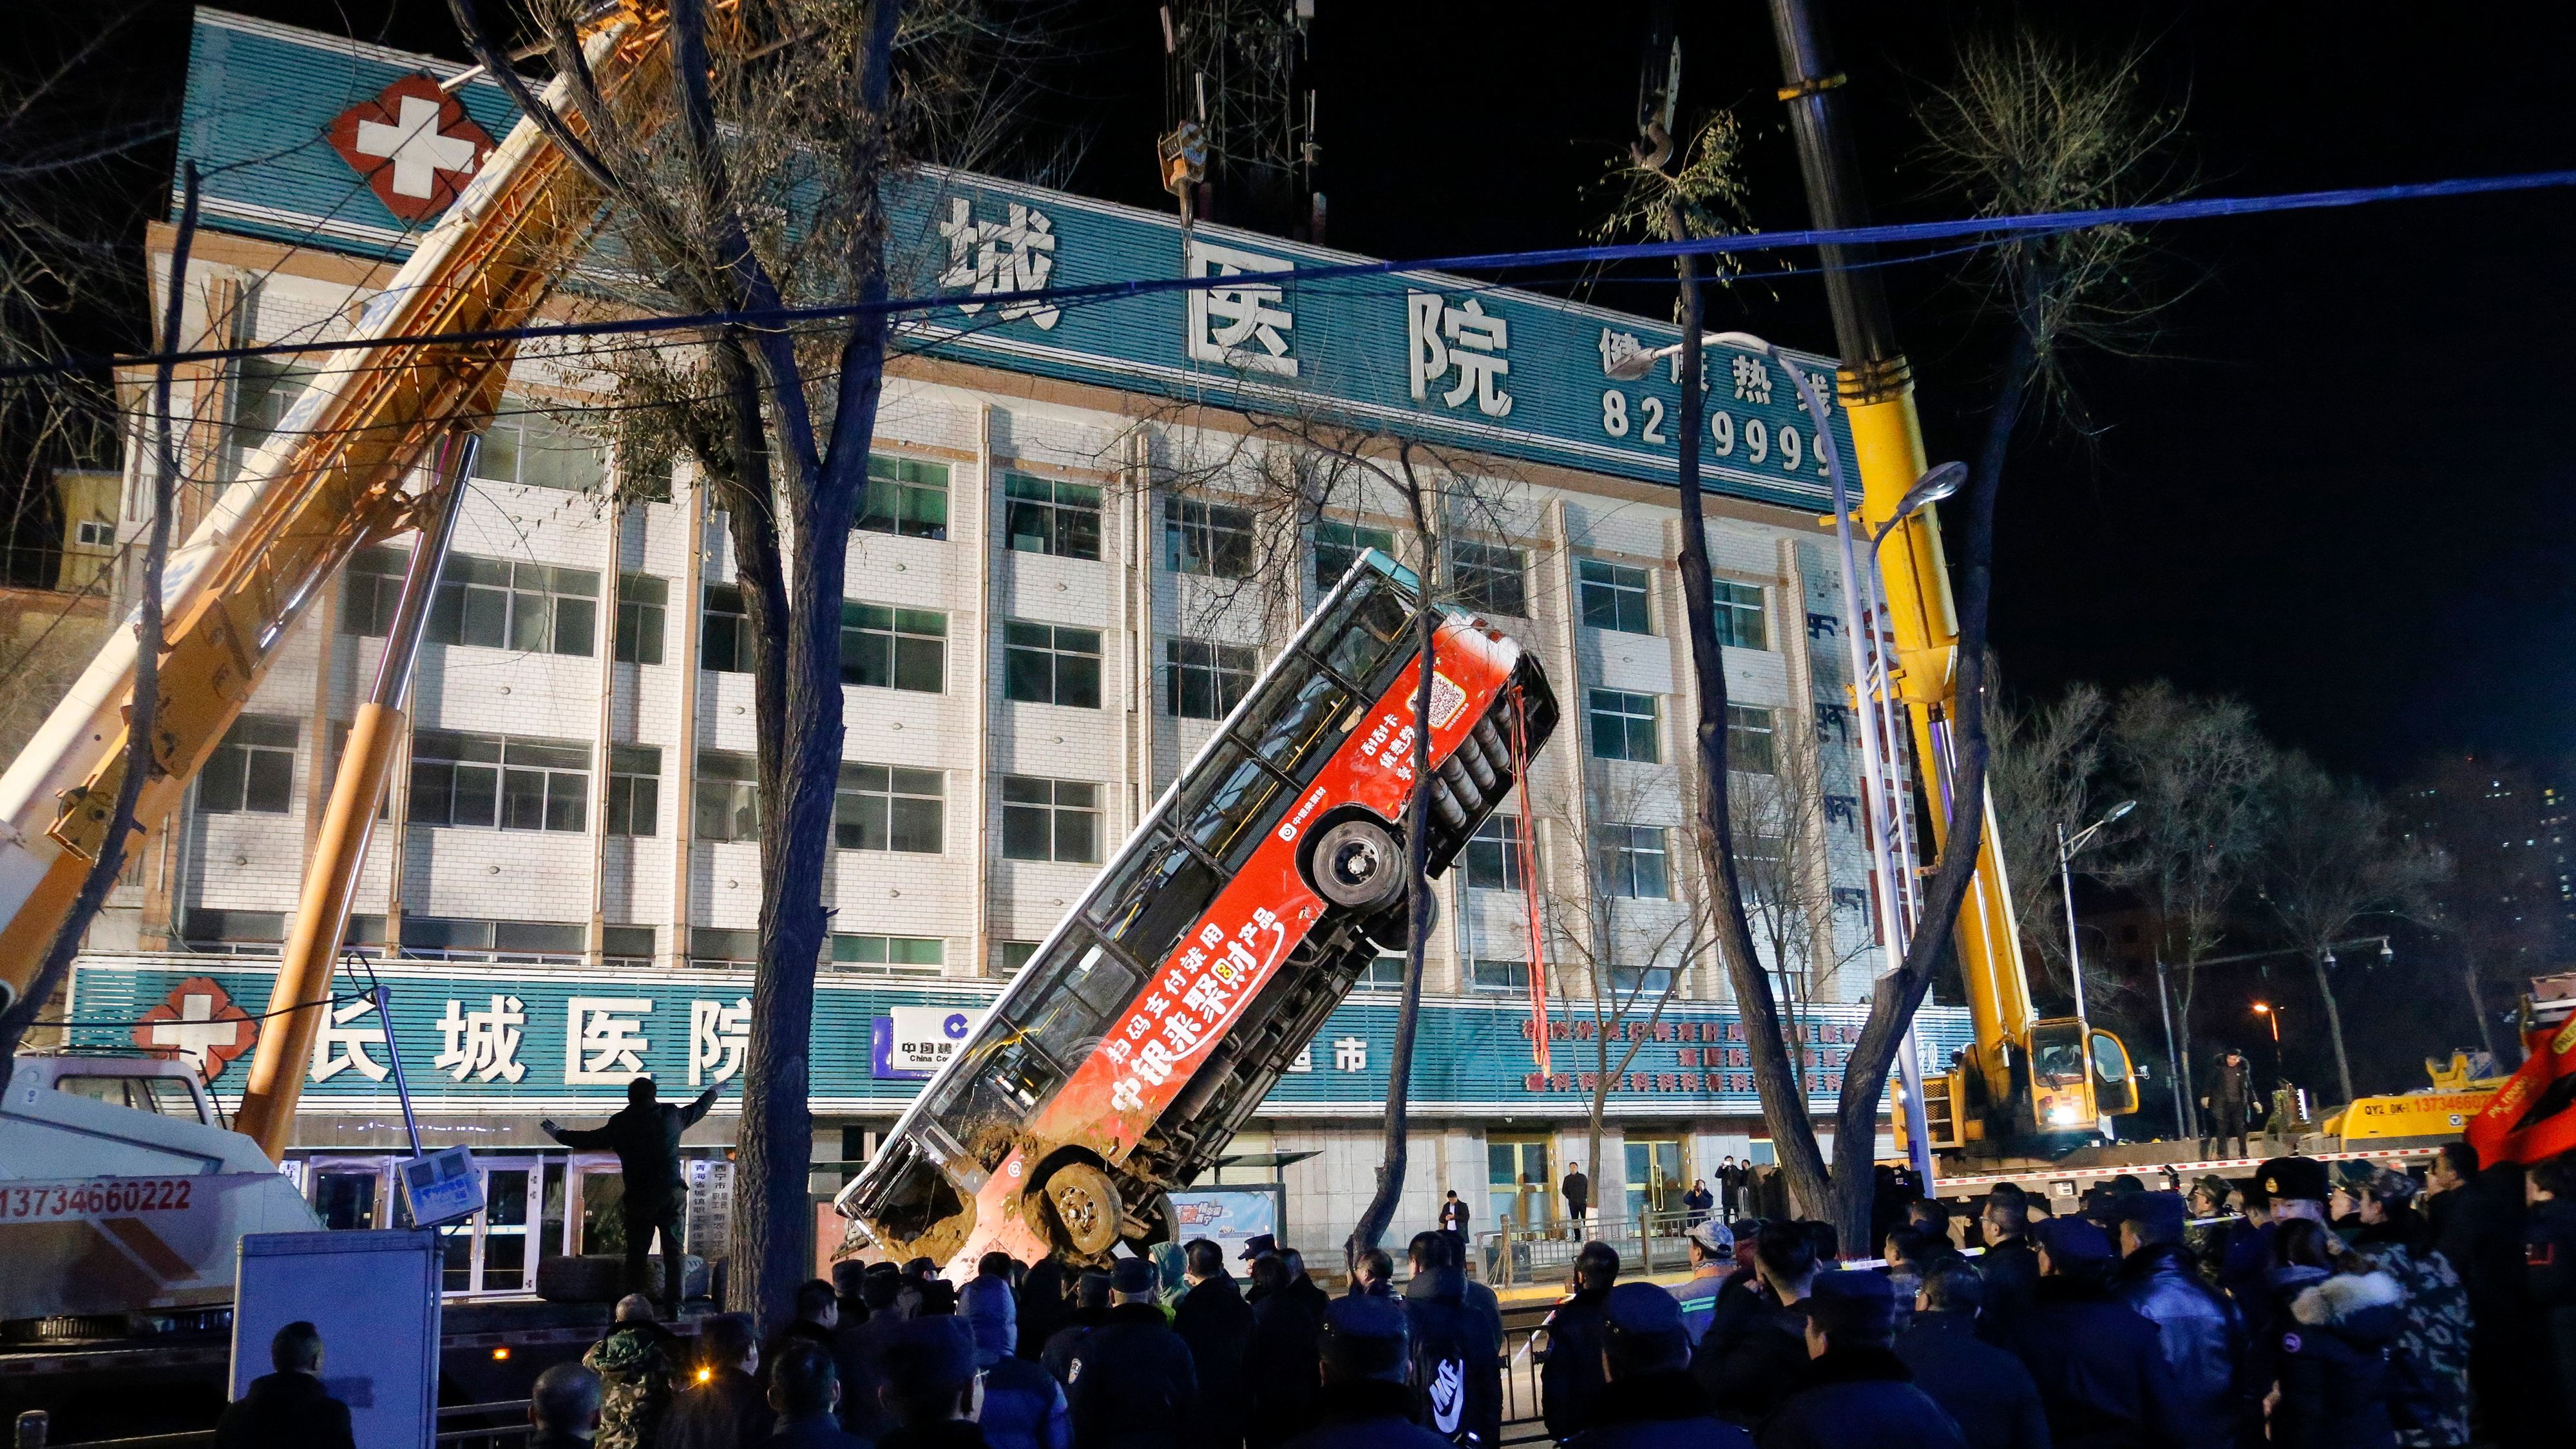 A bus swallowed by a huge sinkhole is lifted out after a road collapsed in Xining in China's northwestern Qinghai province.